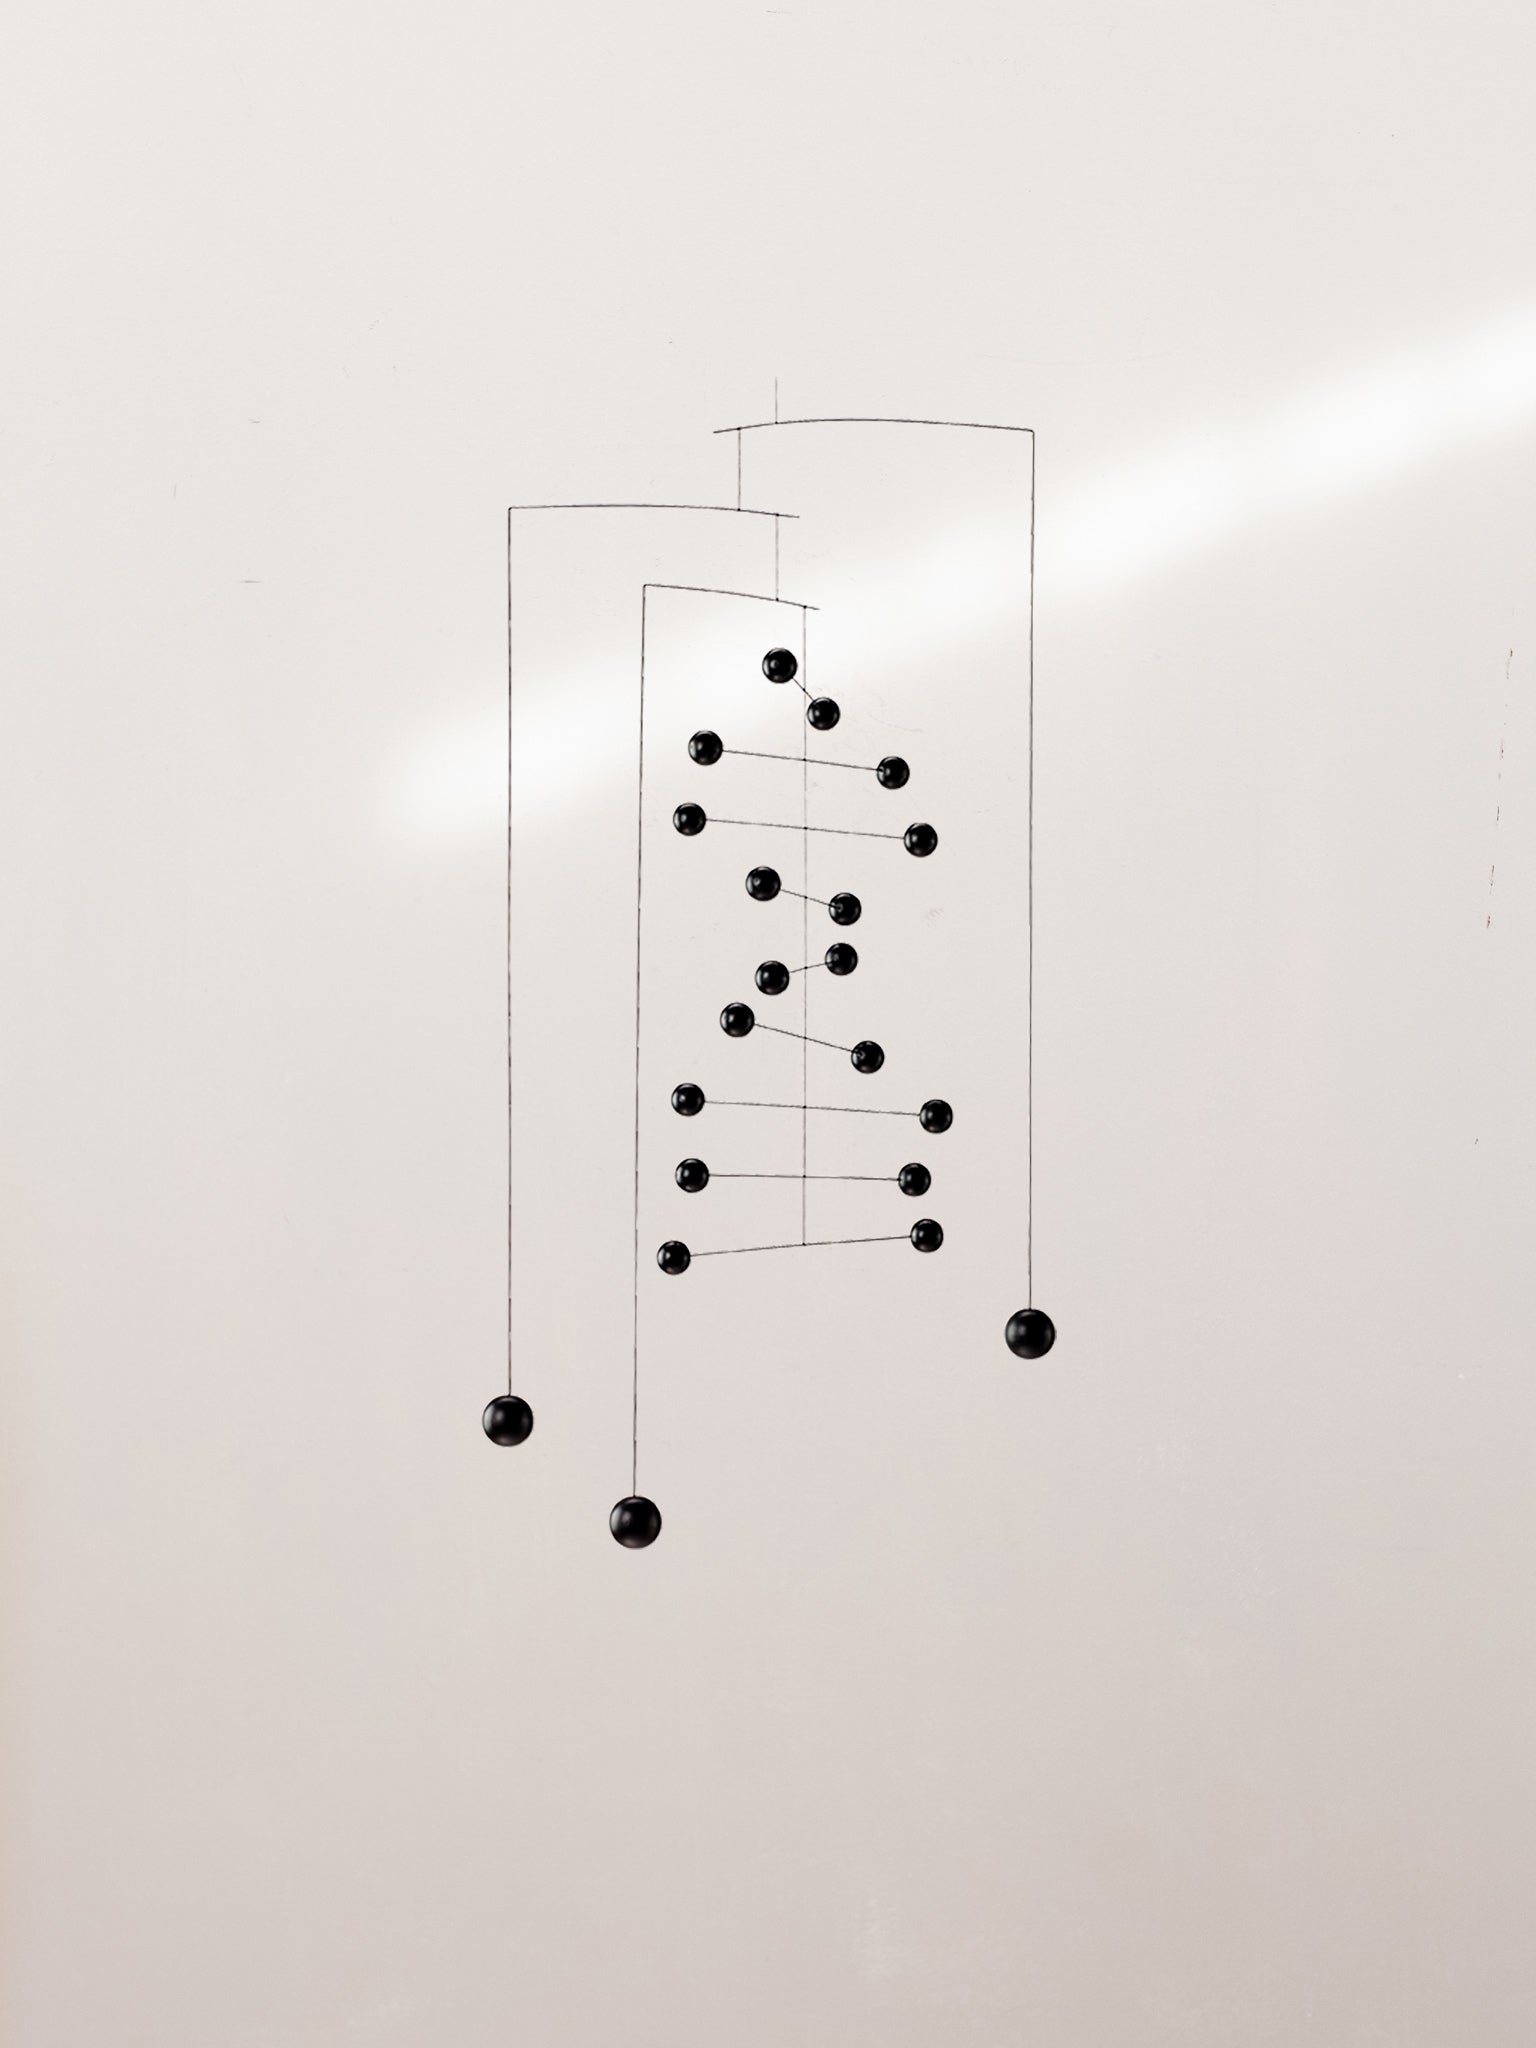 Flensted mobiles_Counterpoint, black